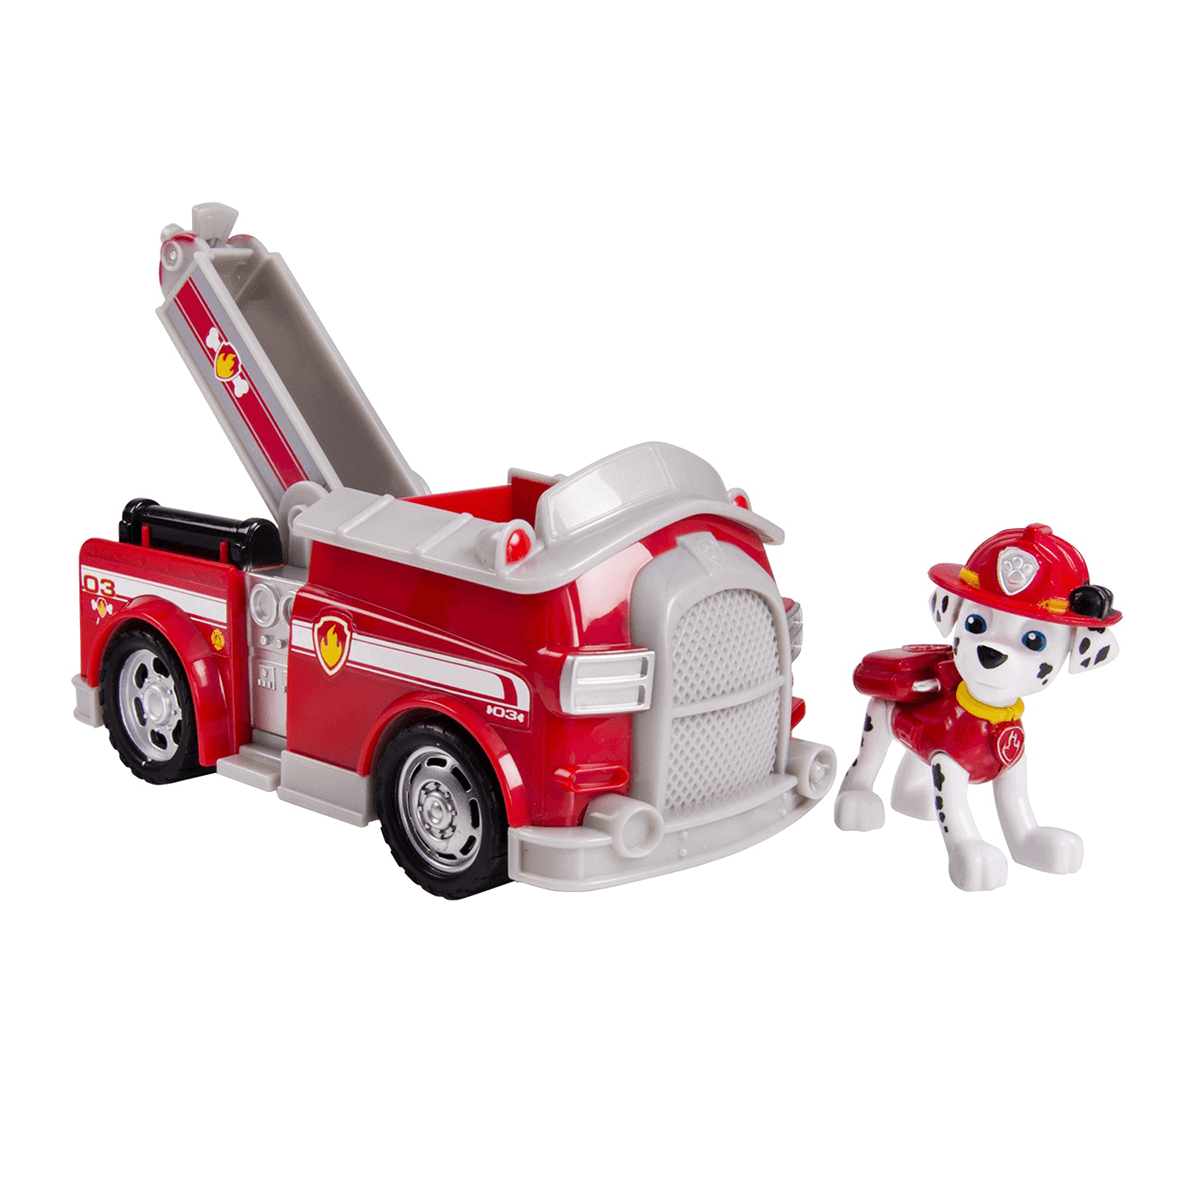  Paw Patrol Fire Truck with Marshall